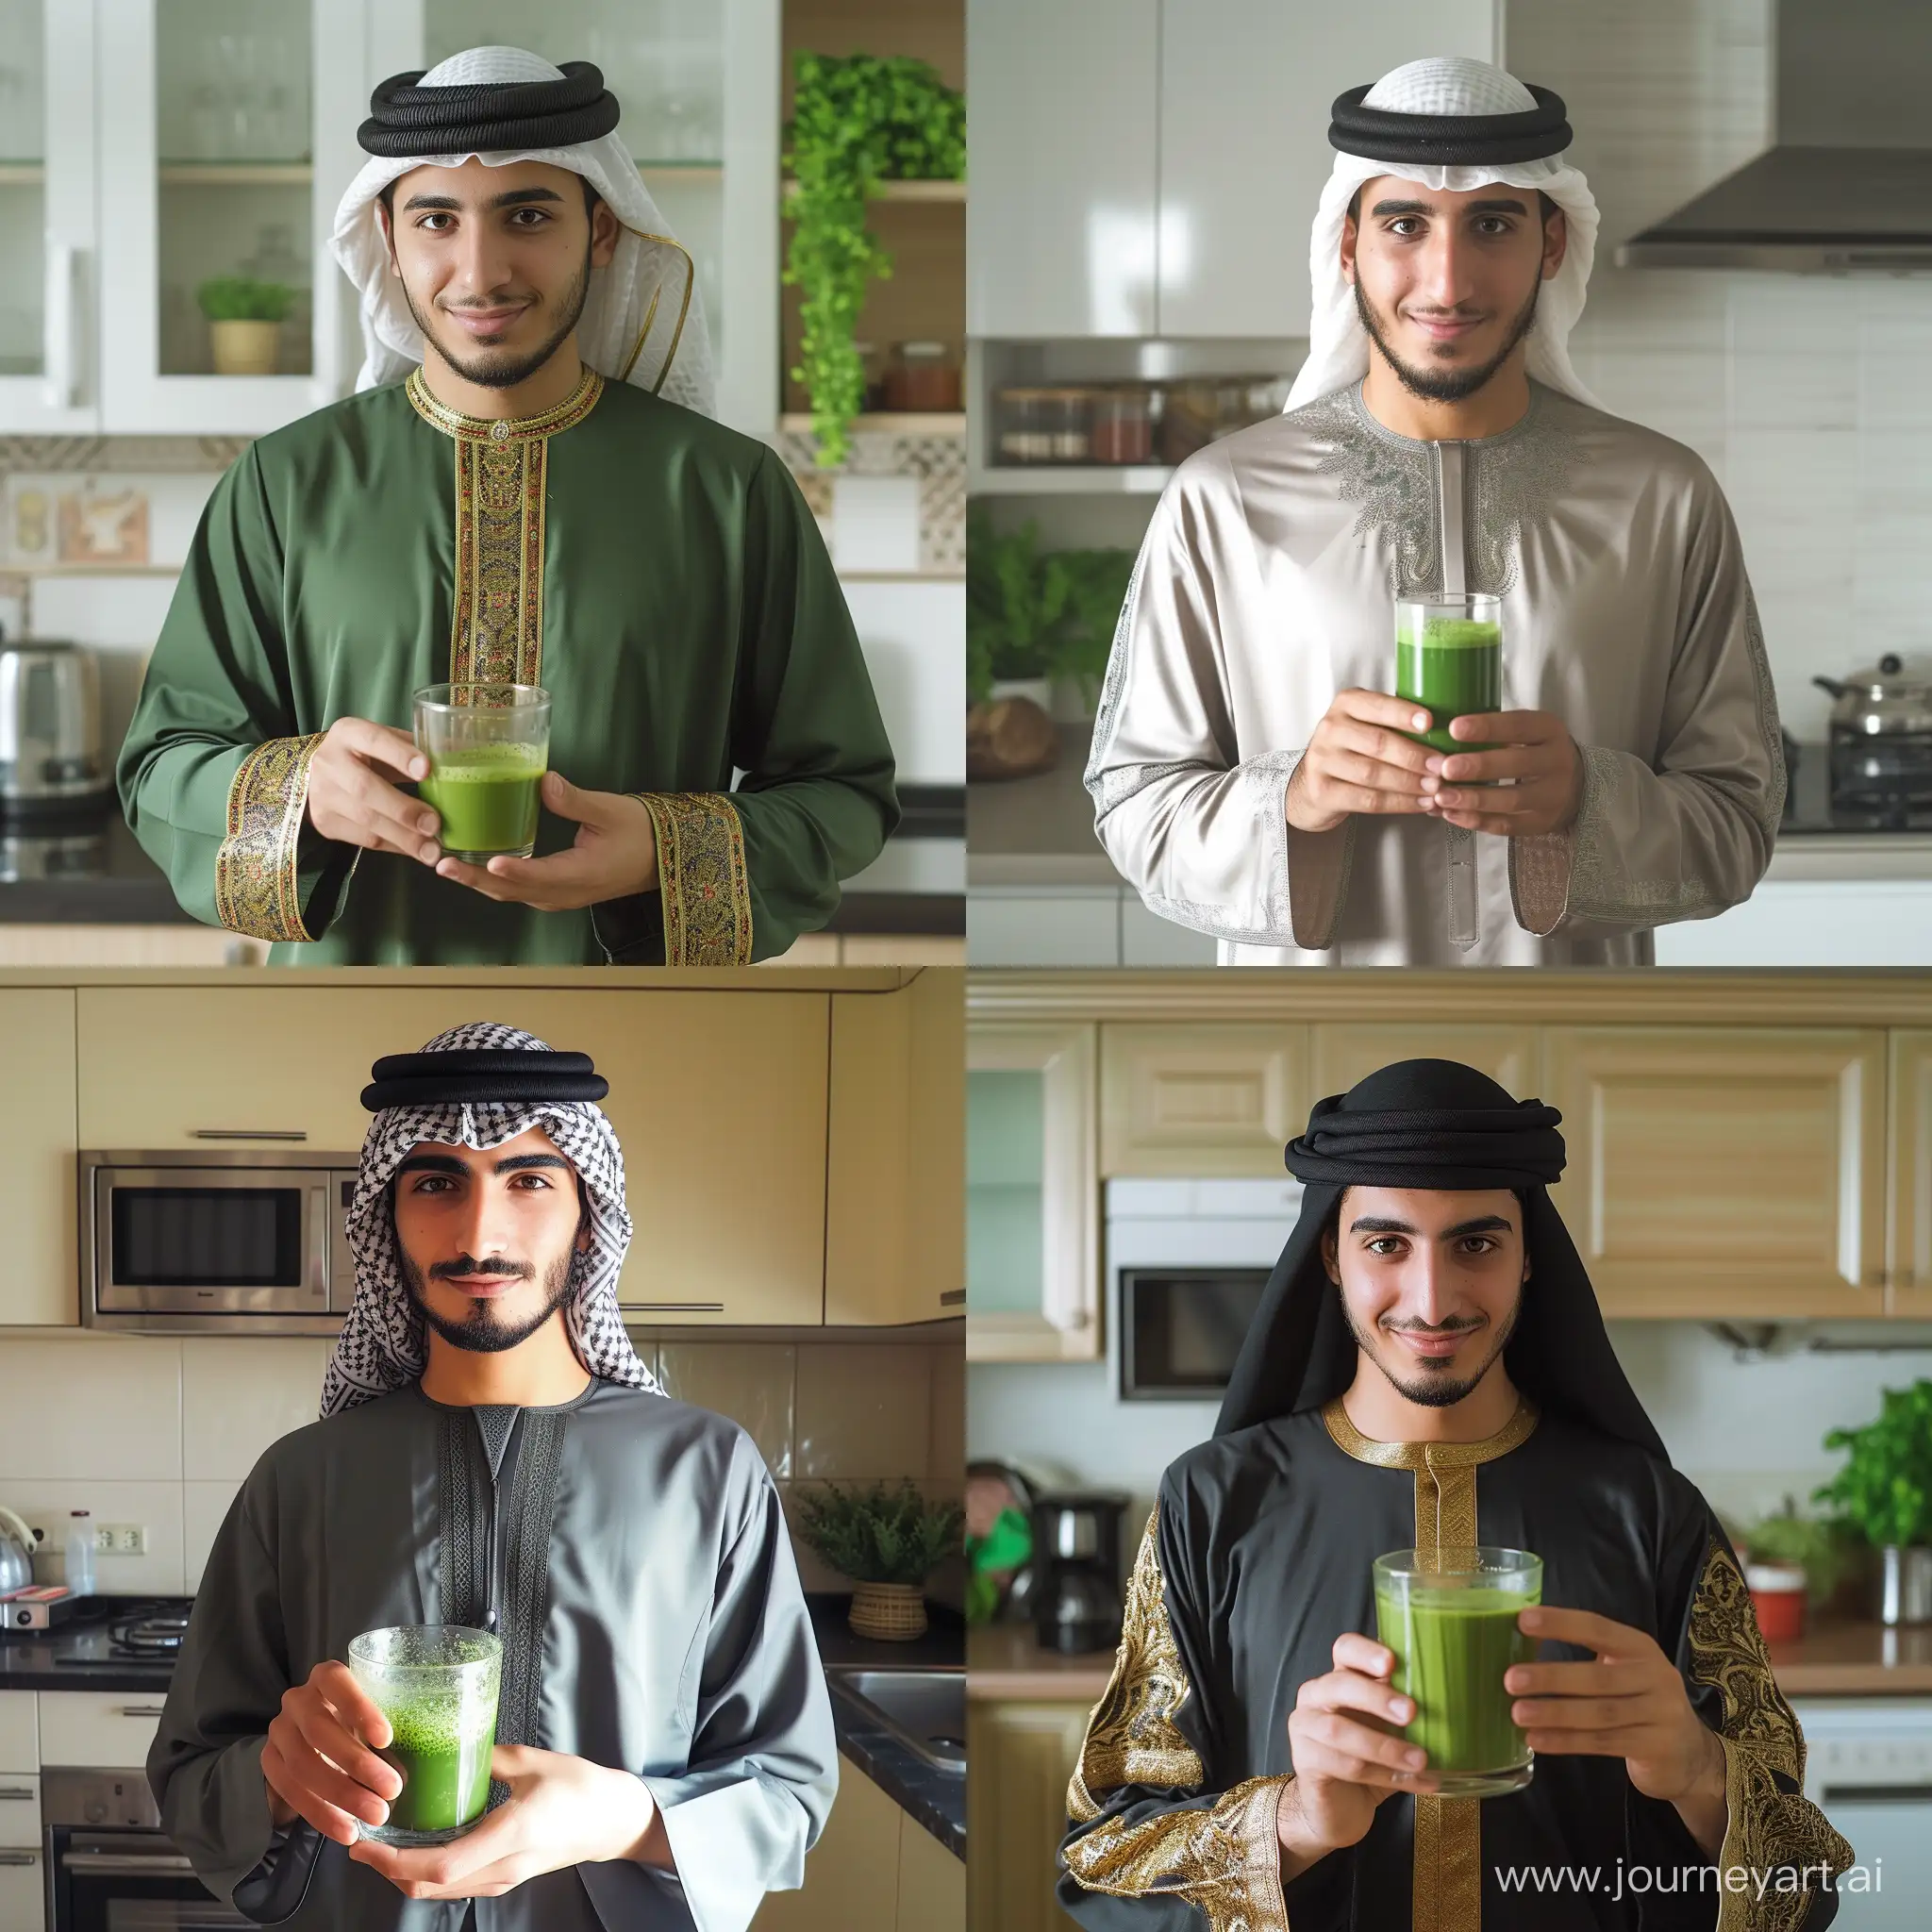 Real and natural photo of young man in Arabic dress holding a glass of green matcha tea. The glass of matcha tea should be clear. The space around him is the kitchen. Full details of matcha tea cup and man's face, clothes and hands. Natural lighting.